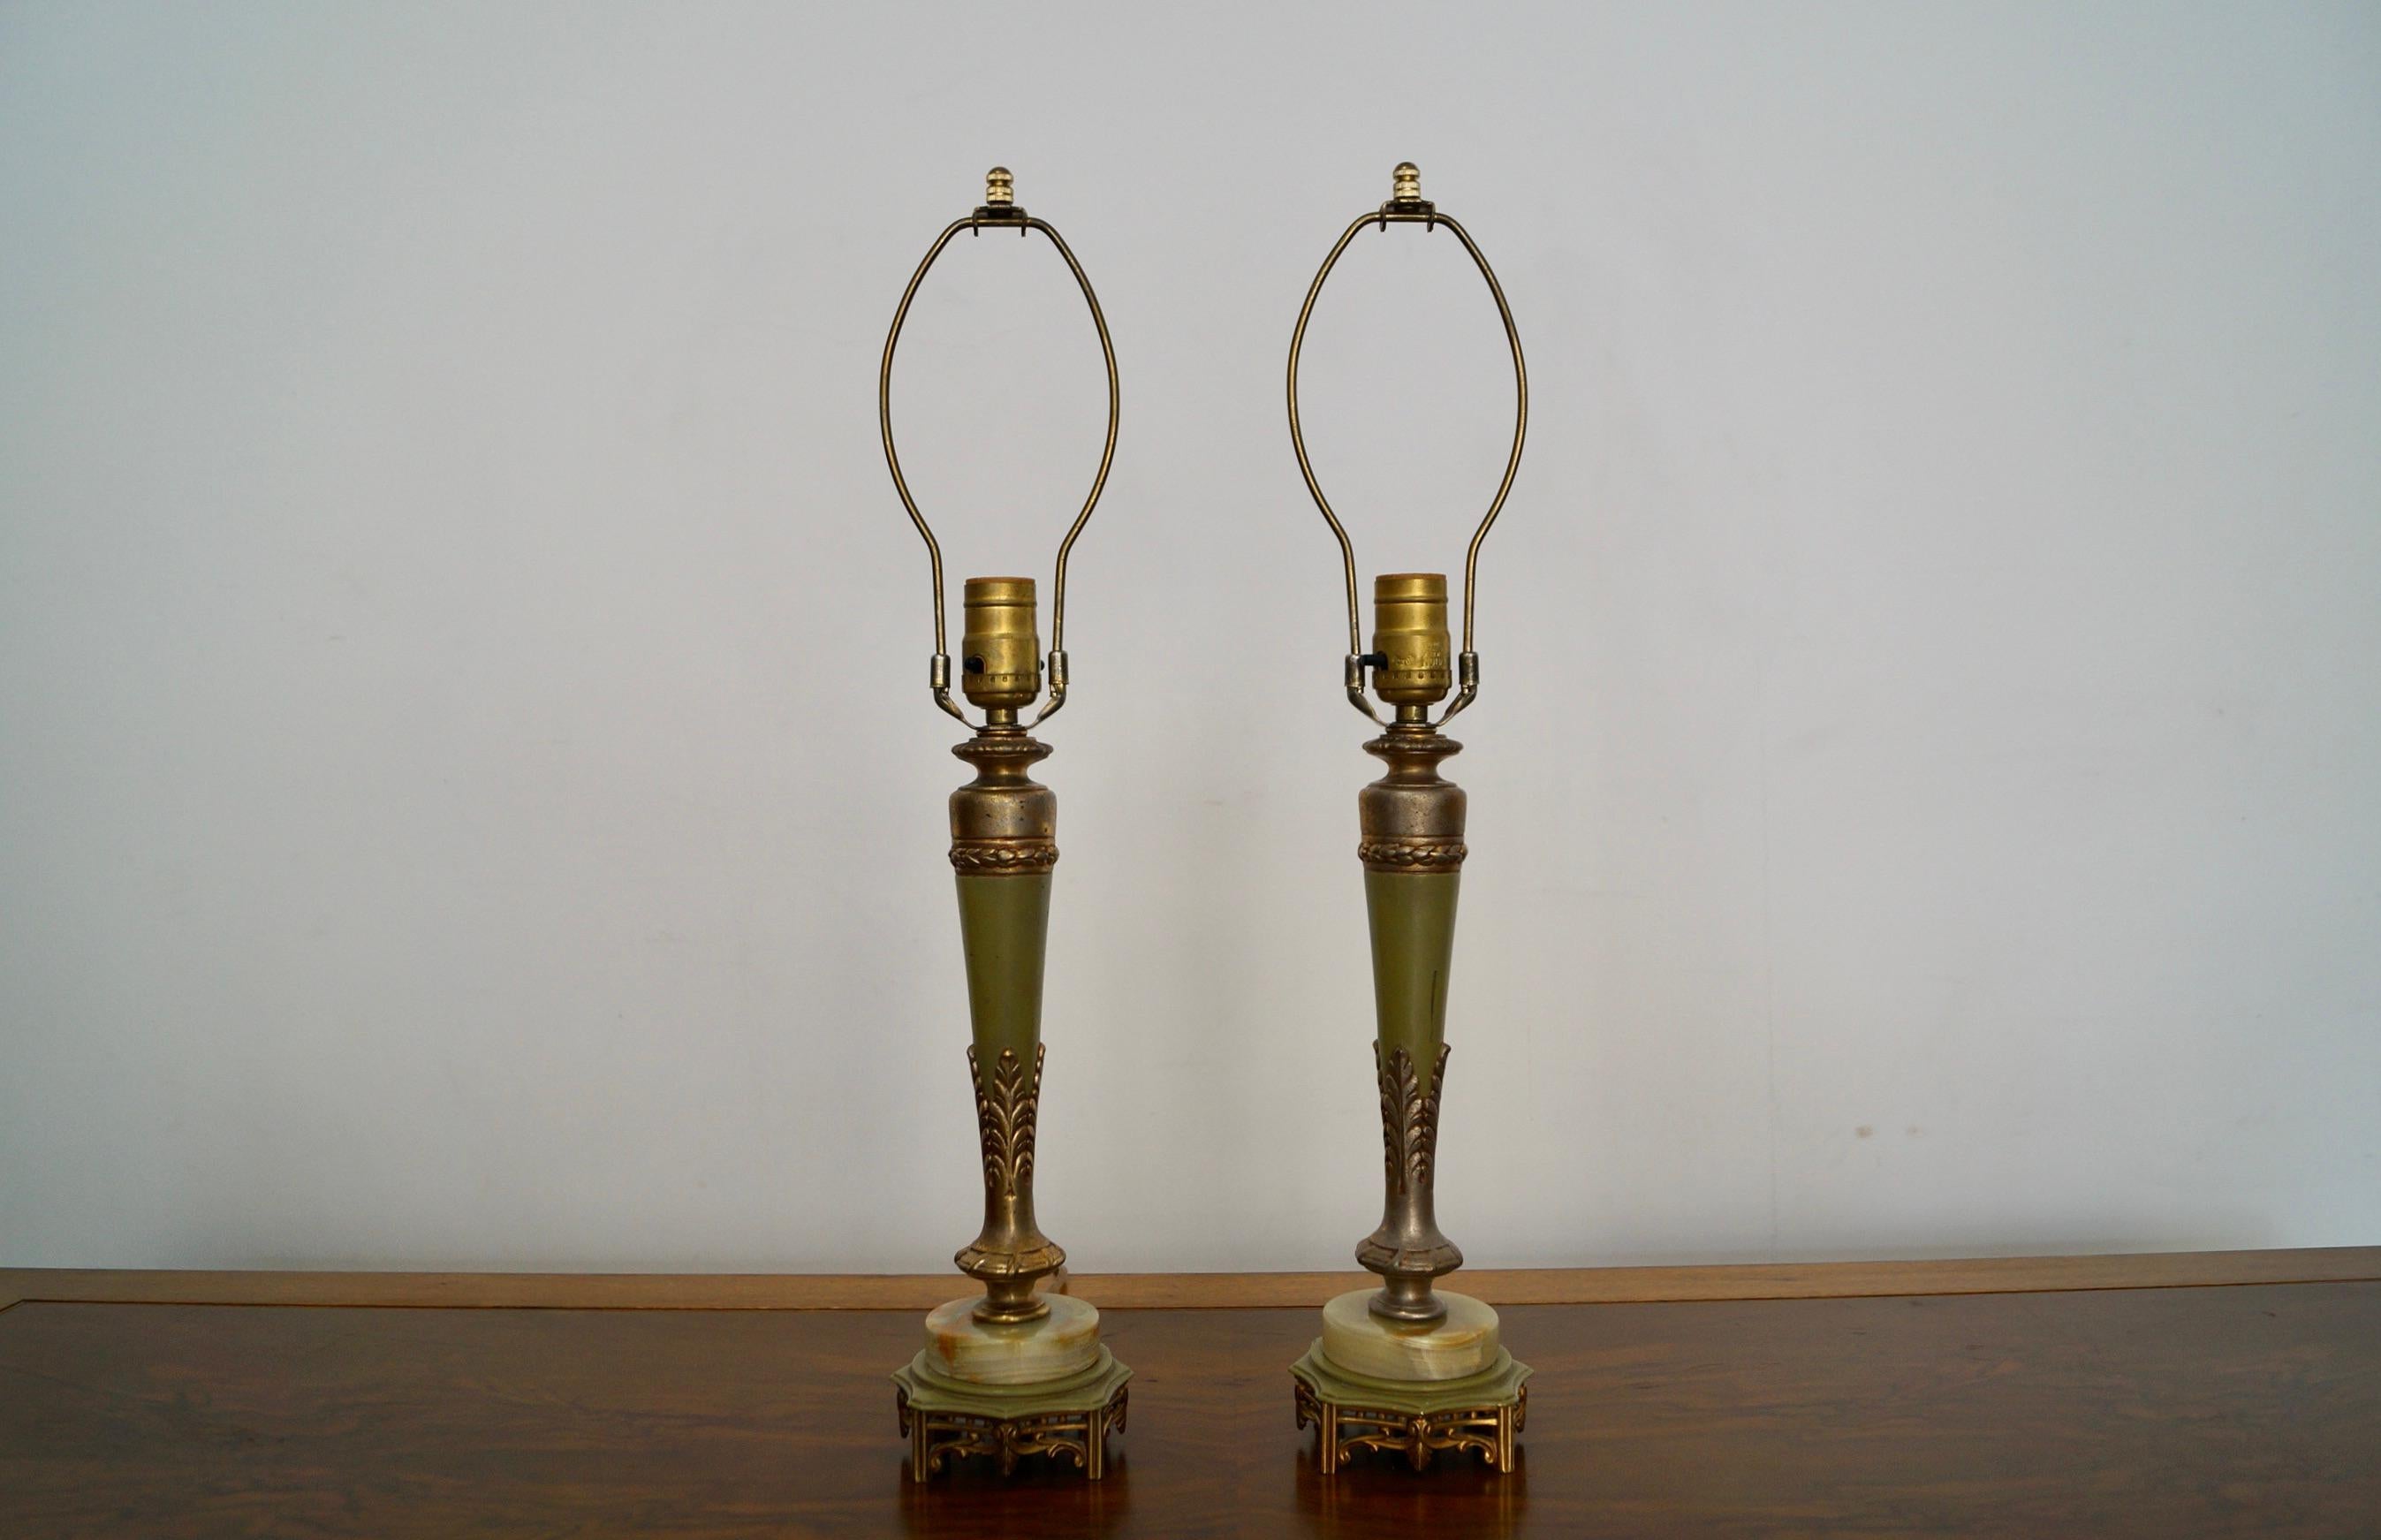 Pair of vintage 1940’s Hollywood Regency table lamps for sale. Manufactured by Rembrandt, and are in excellent condition. They have a brass, metal, and marble marble base with a metal and brass stem. They are a beautiful olive green tone with